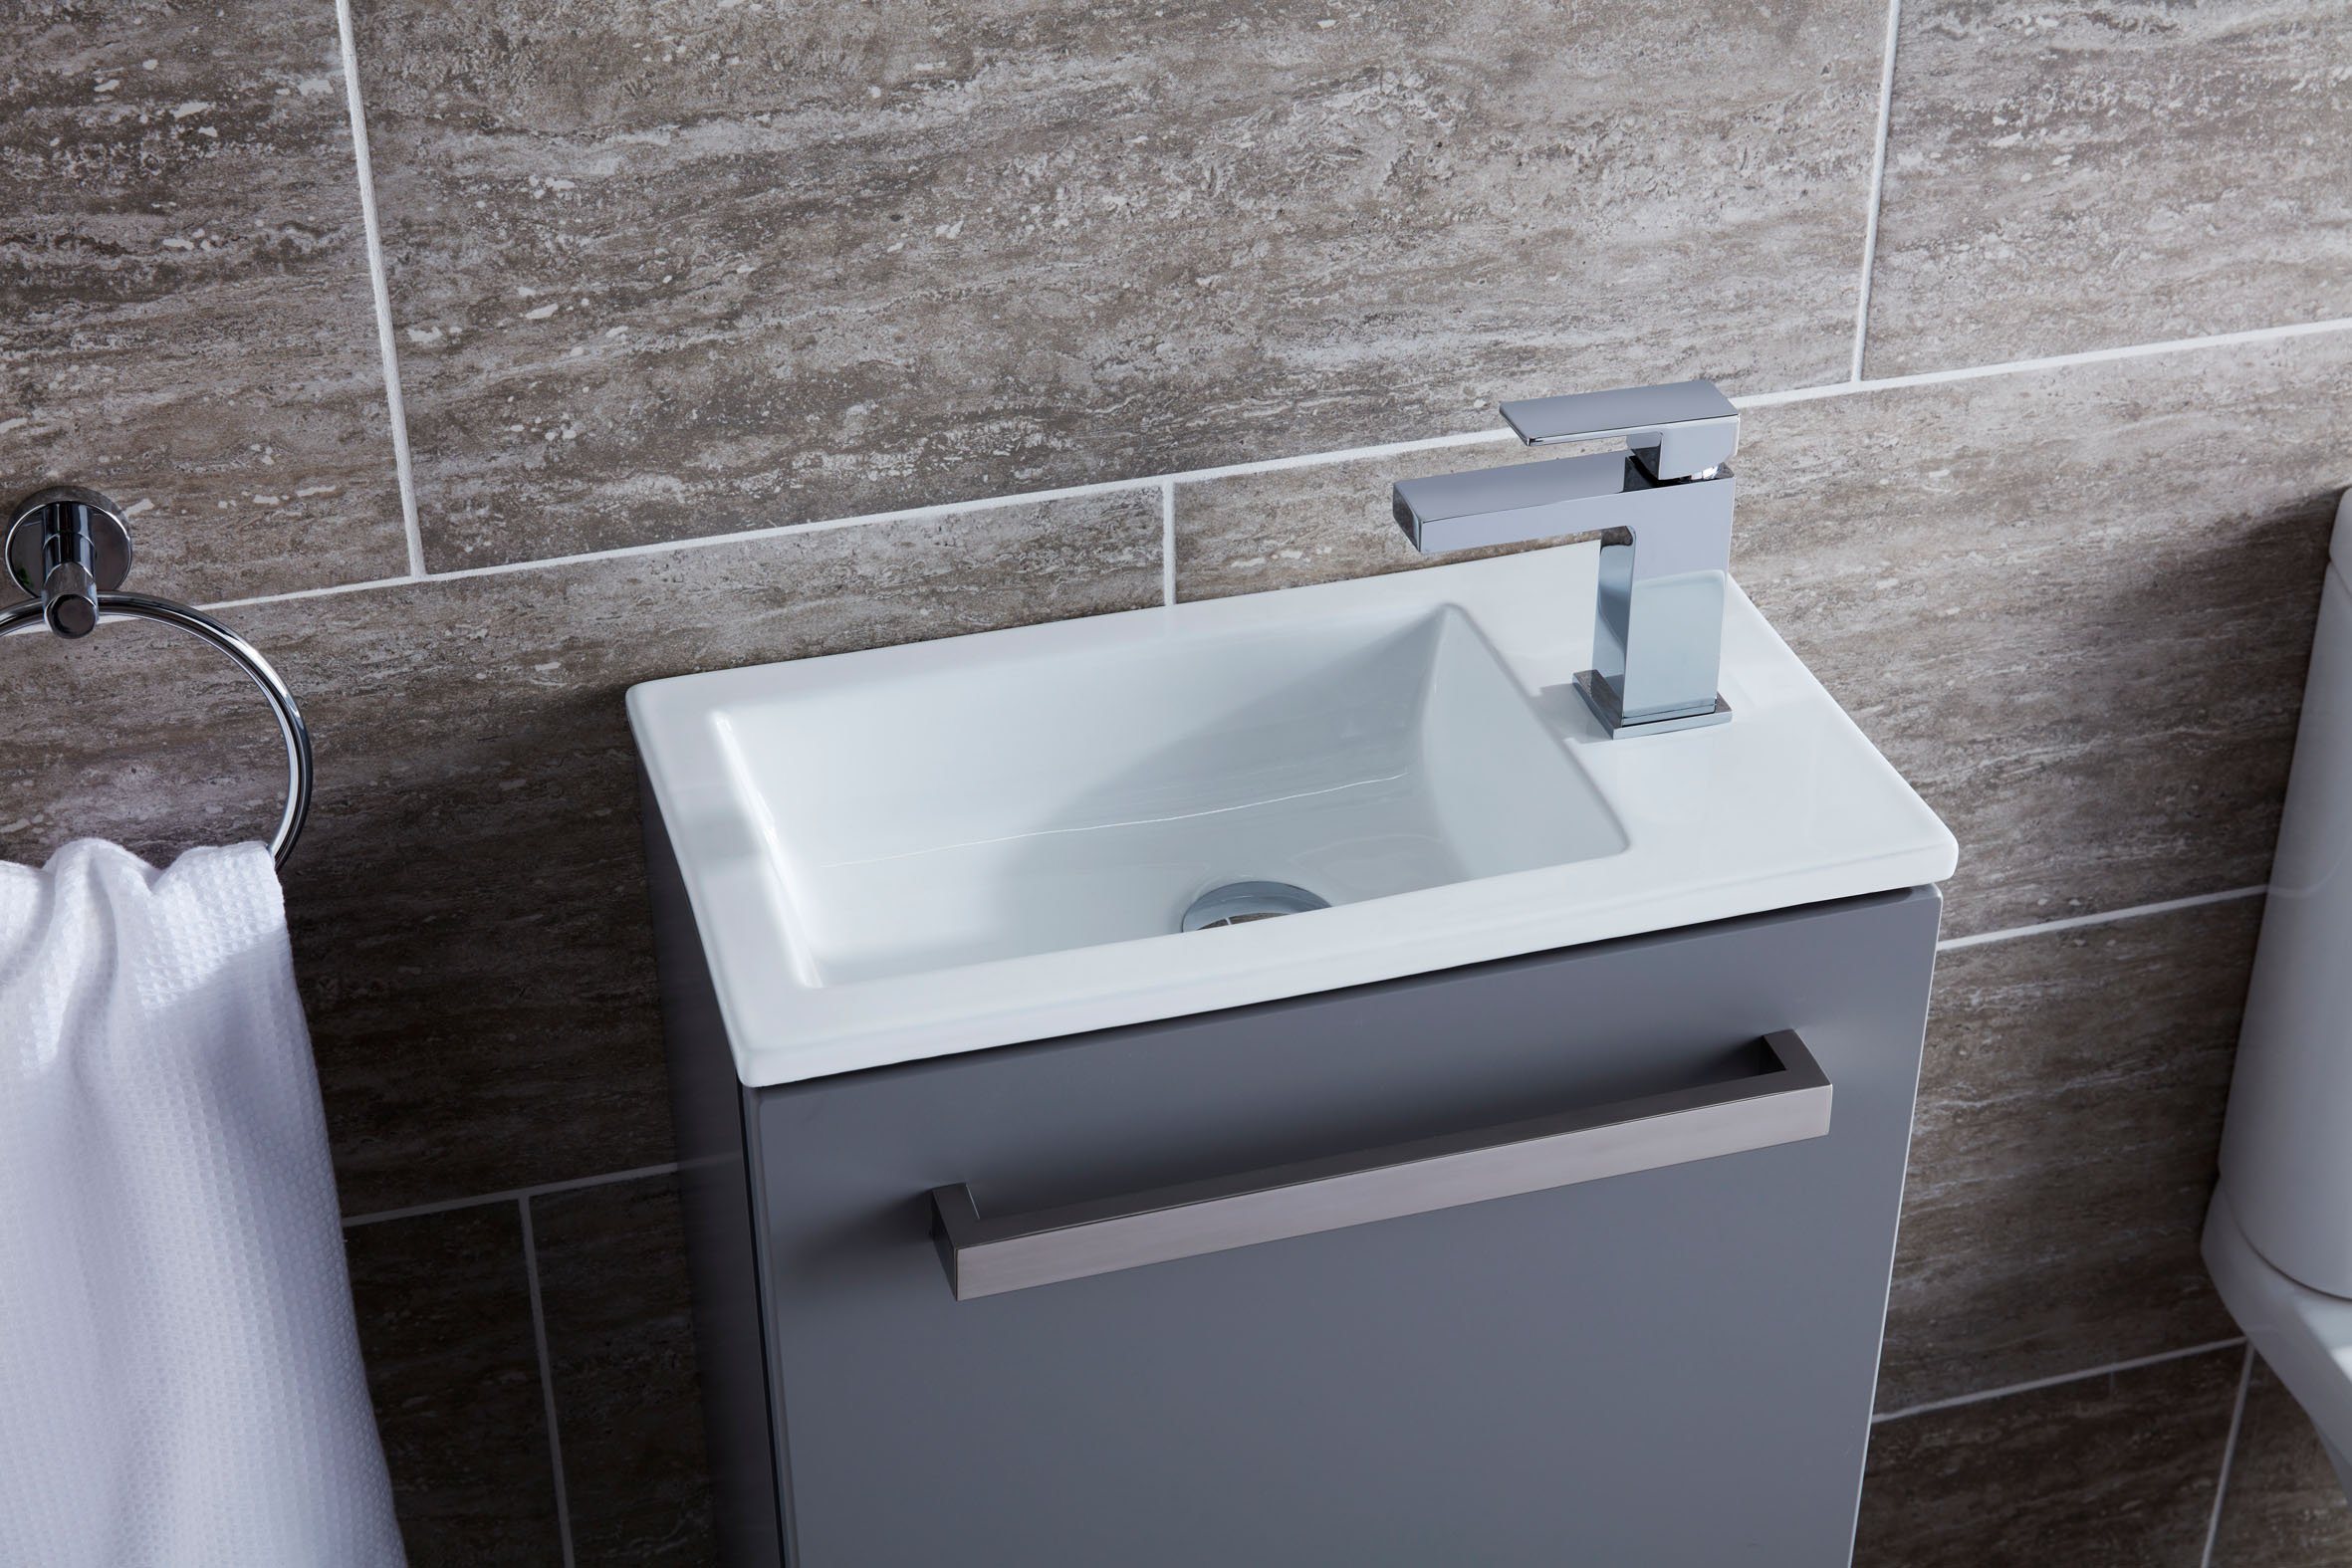 How To Change A Basin Waste